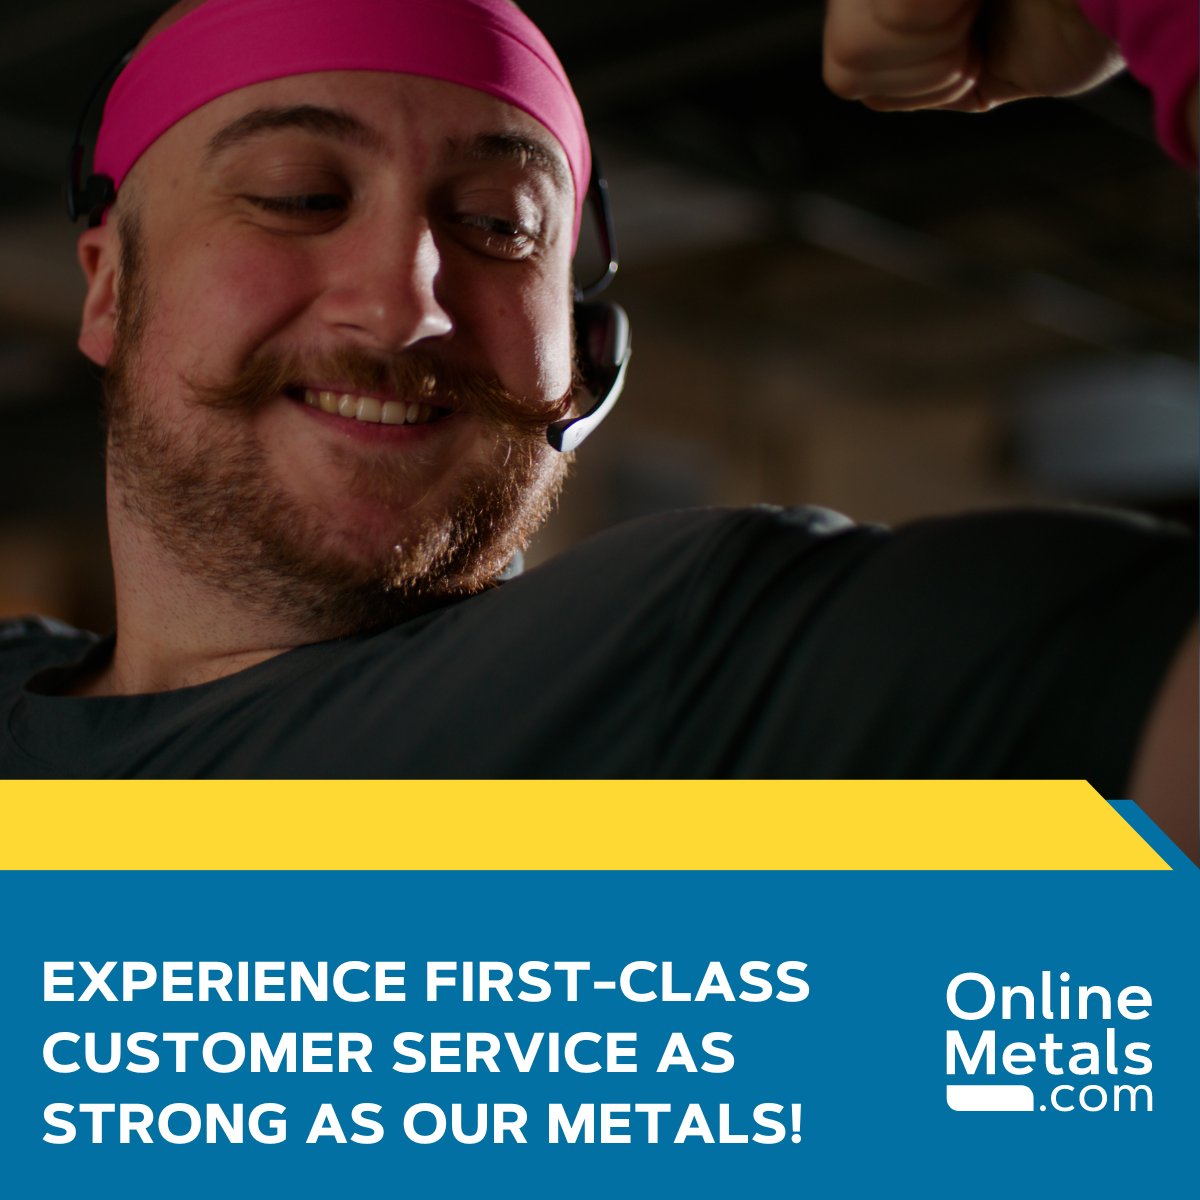 💪 Our Strength is Our Service
--
Whether you're looking for on-site articles or tools, a real person to help you get what you need via chat or phone, or in depth product pages. Online Metals has got you covered! #wheremetallives #madewithmetals